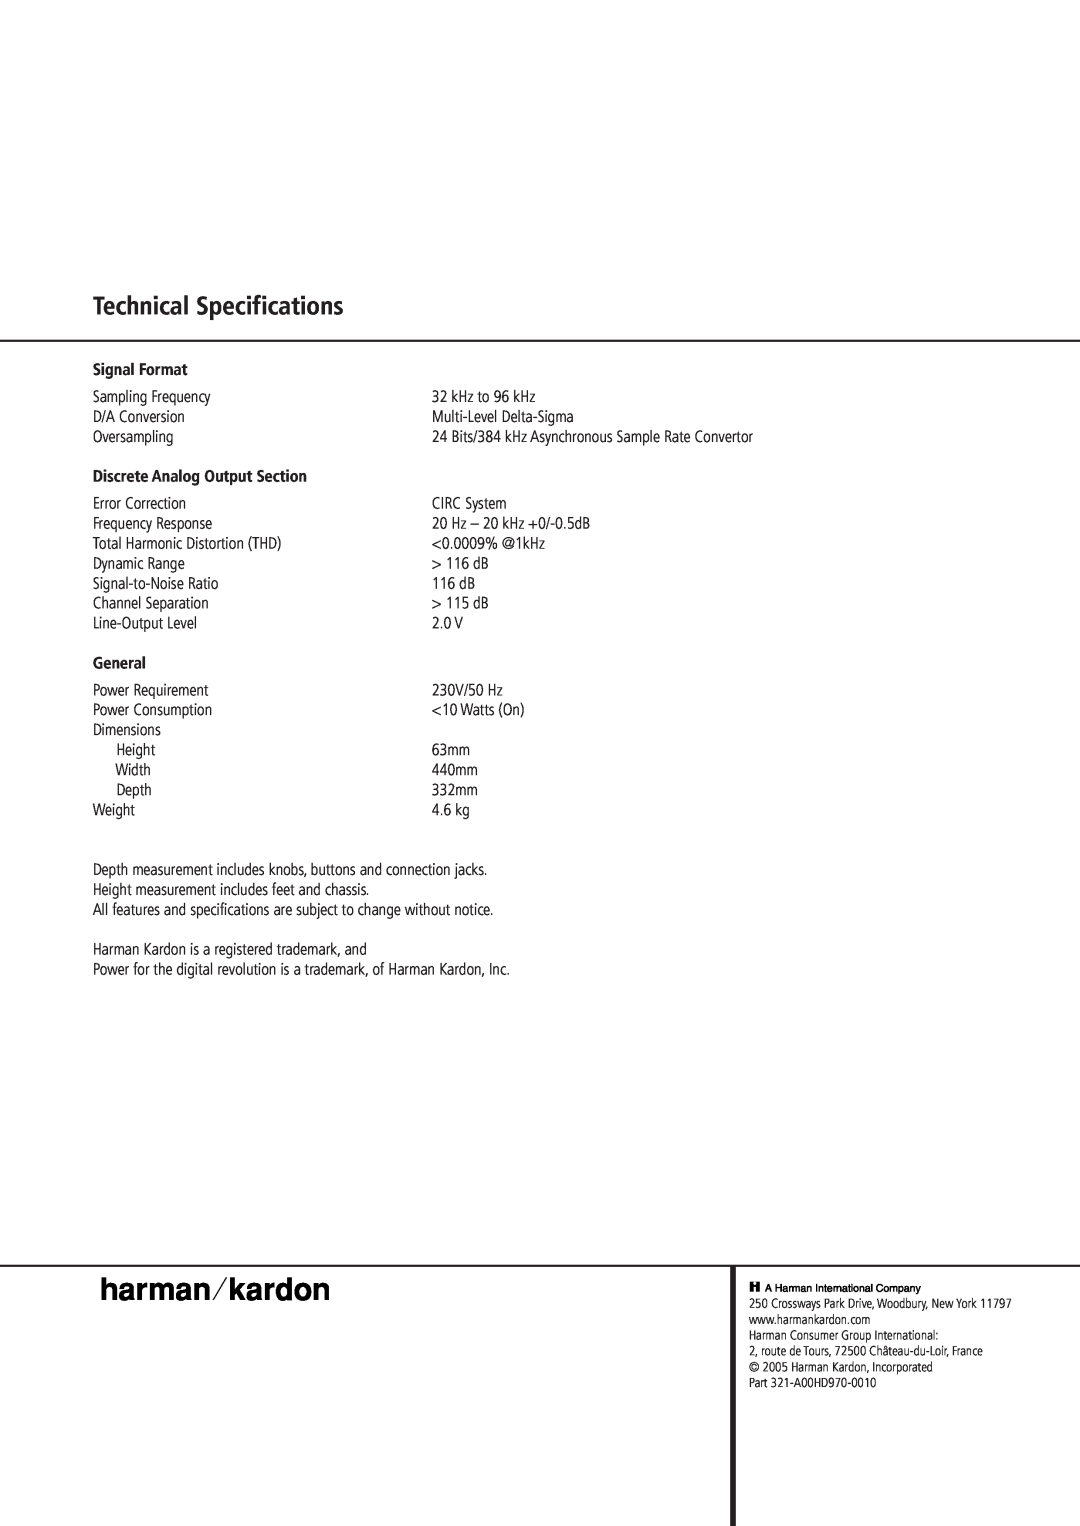 Harman-Kardon HD 970 owner manual Technical Specifications, Signal Format, Discrete Analog Output Section, General 